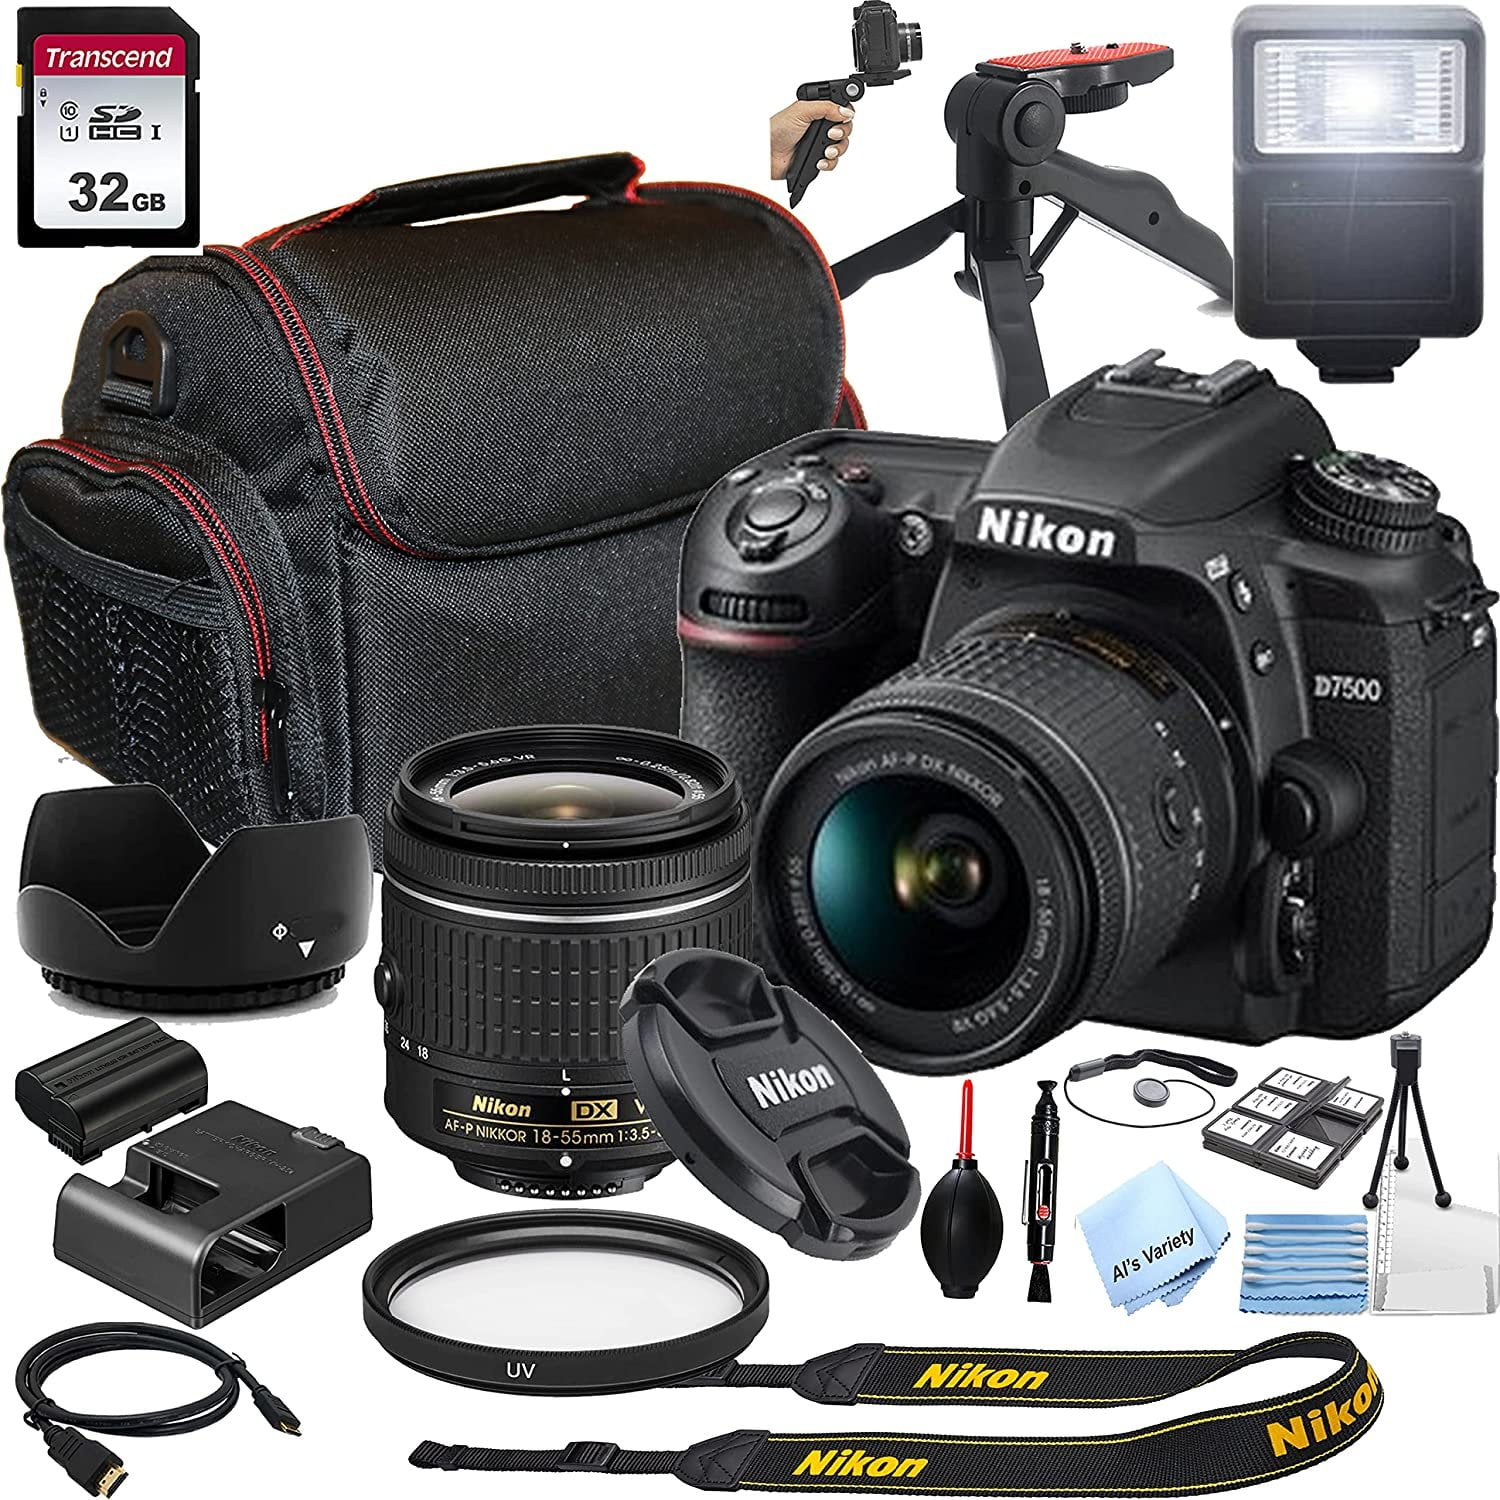 Nikon D5600 DSLR Camera with 18-55mm VR and 70-300mm Lenses + 128GB Card,  Tripod, Flash, and More (20pc Bundle)